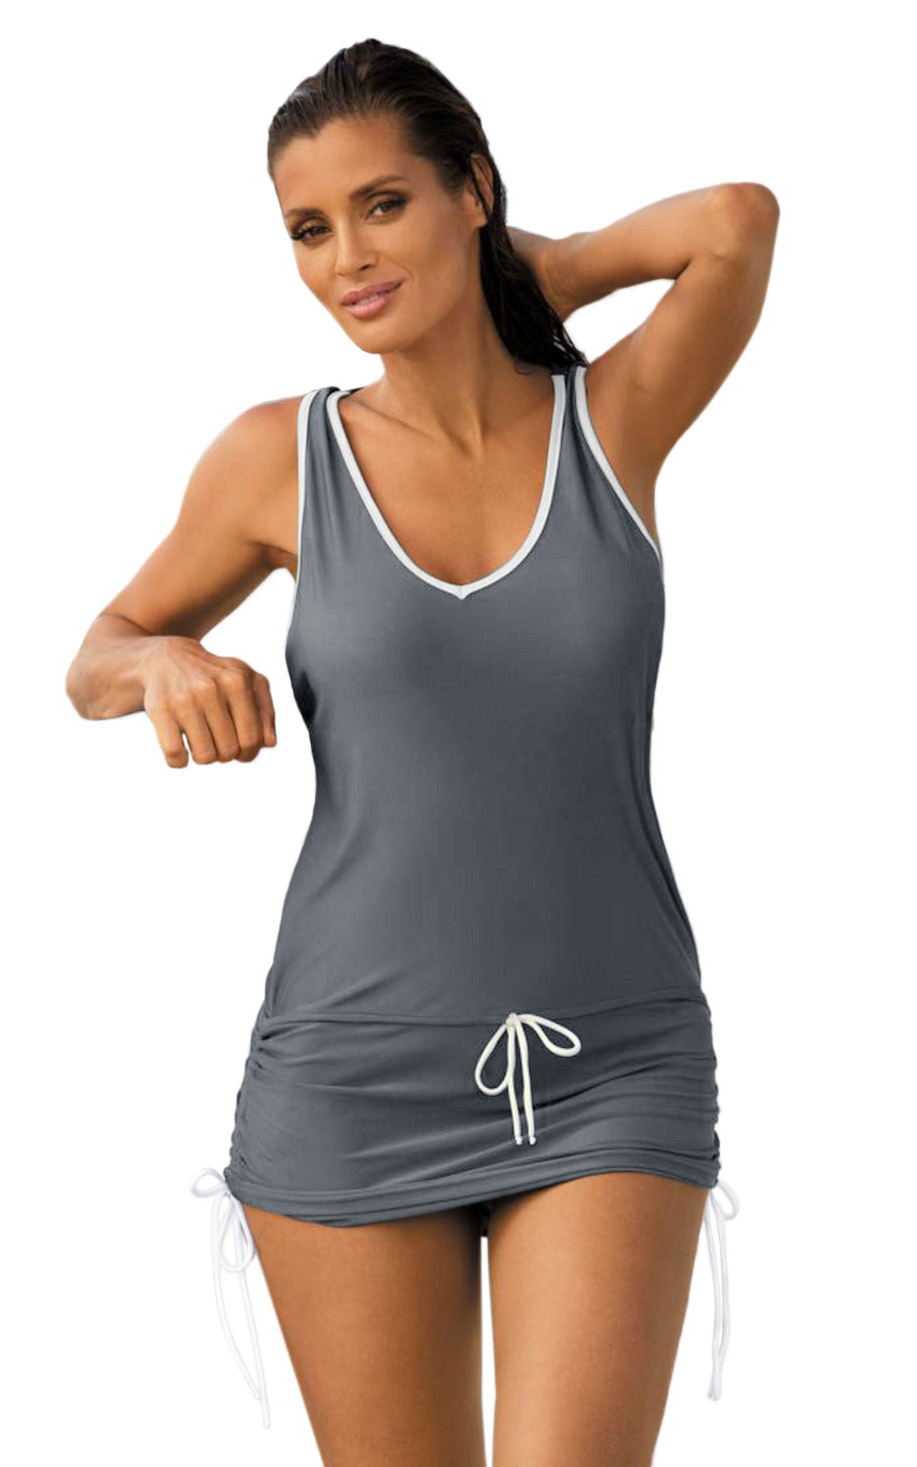 BY420116-11 Gray Contrast-colored Beach Dress Attached with Panty